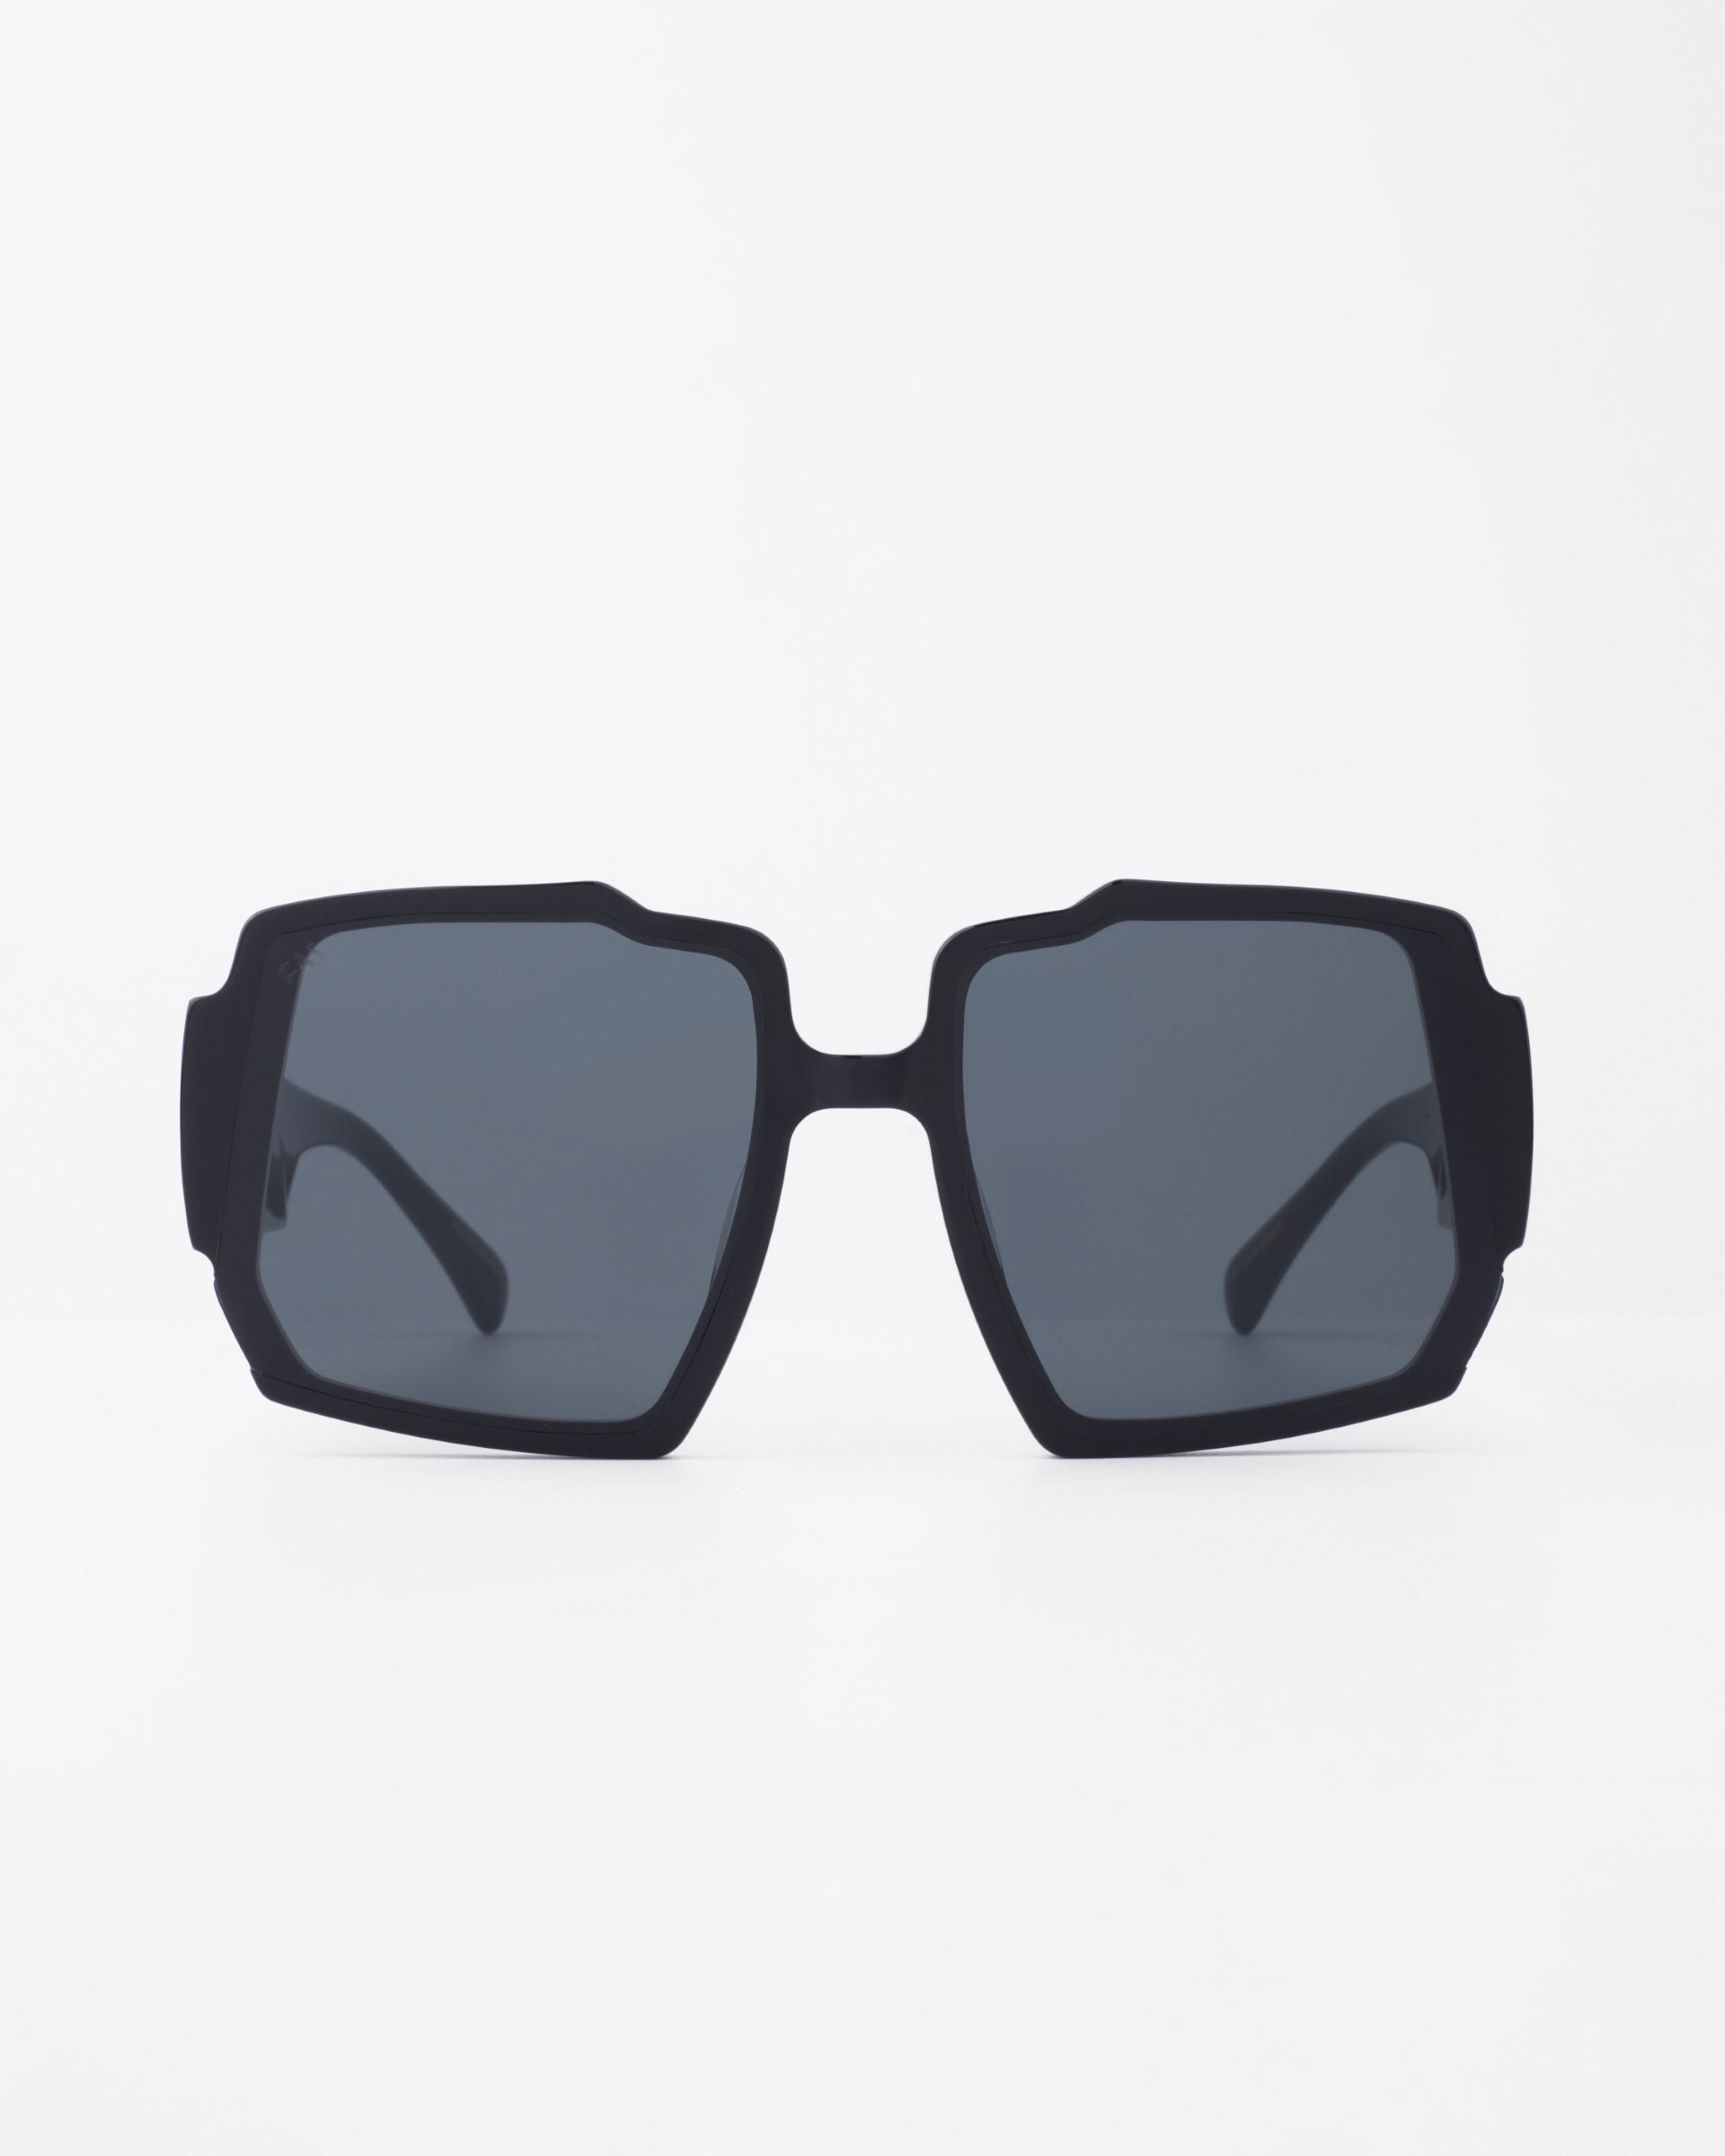 A pair of black, square-shaped For Art&#39;s Sake® Moritz sunglasses with chunky acetate frames and UV-protected dark lenses is displayed against a plain white background.